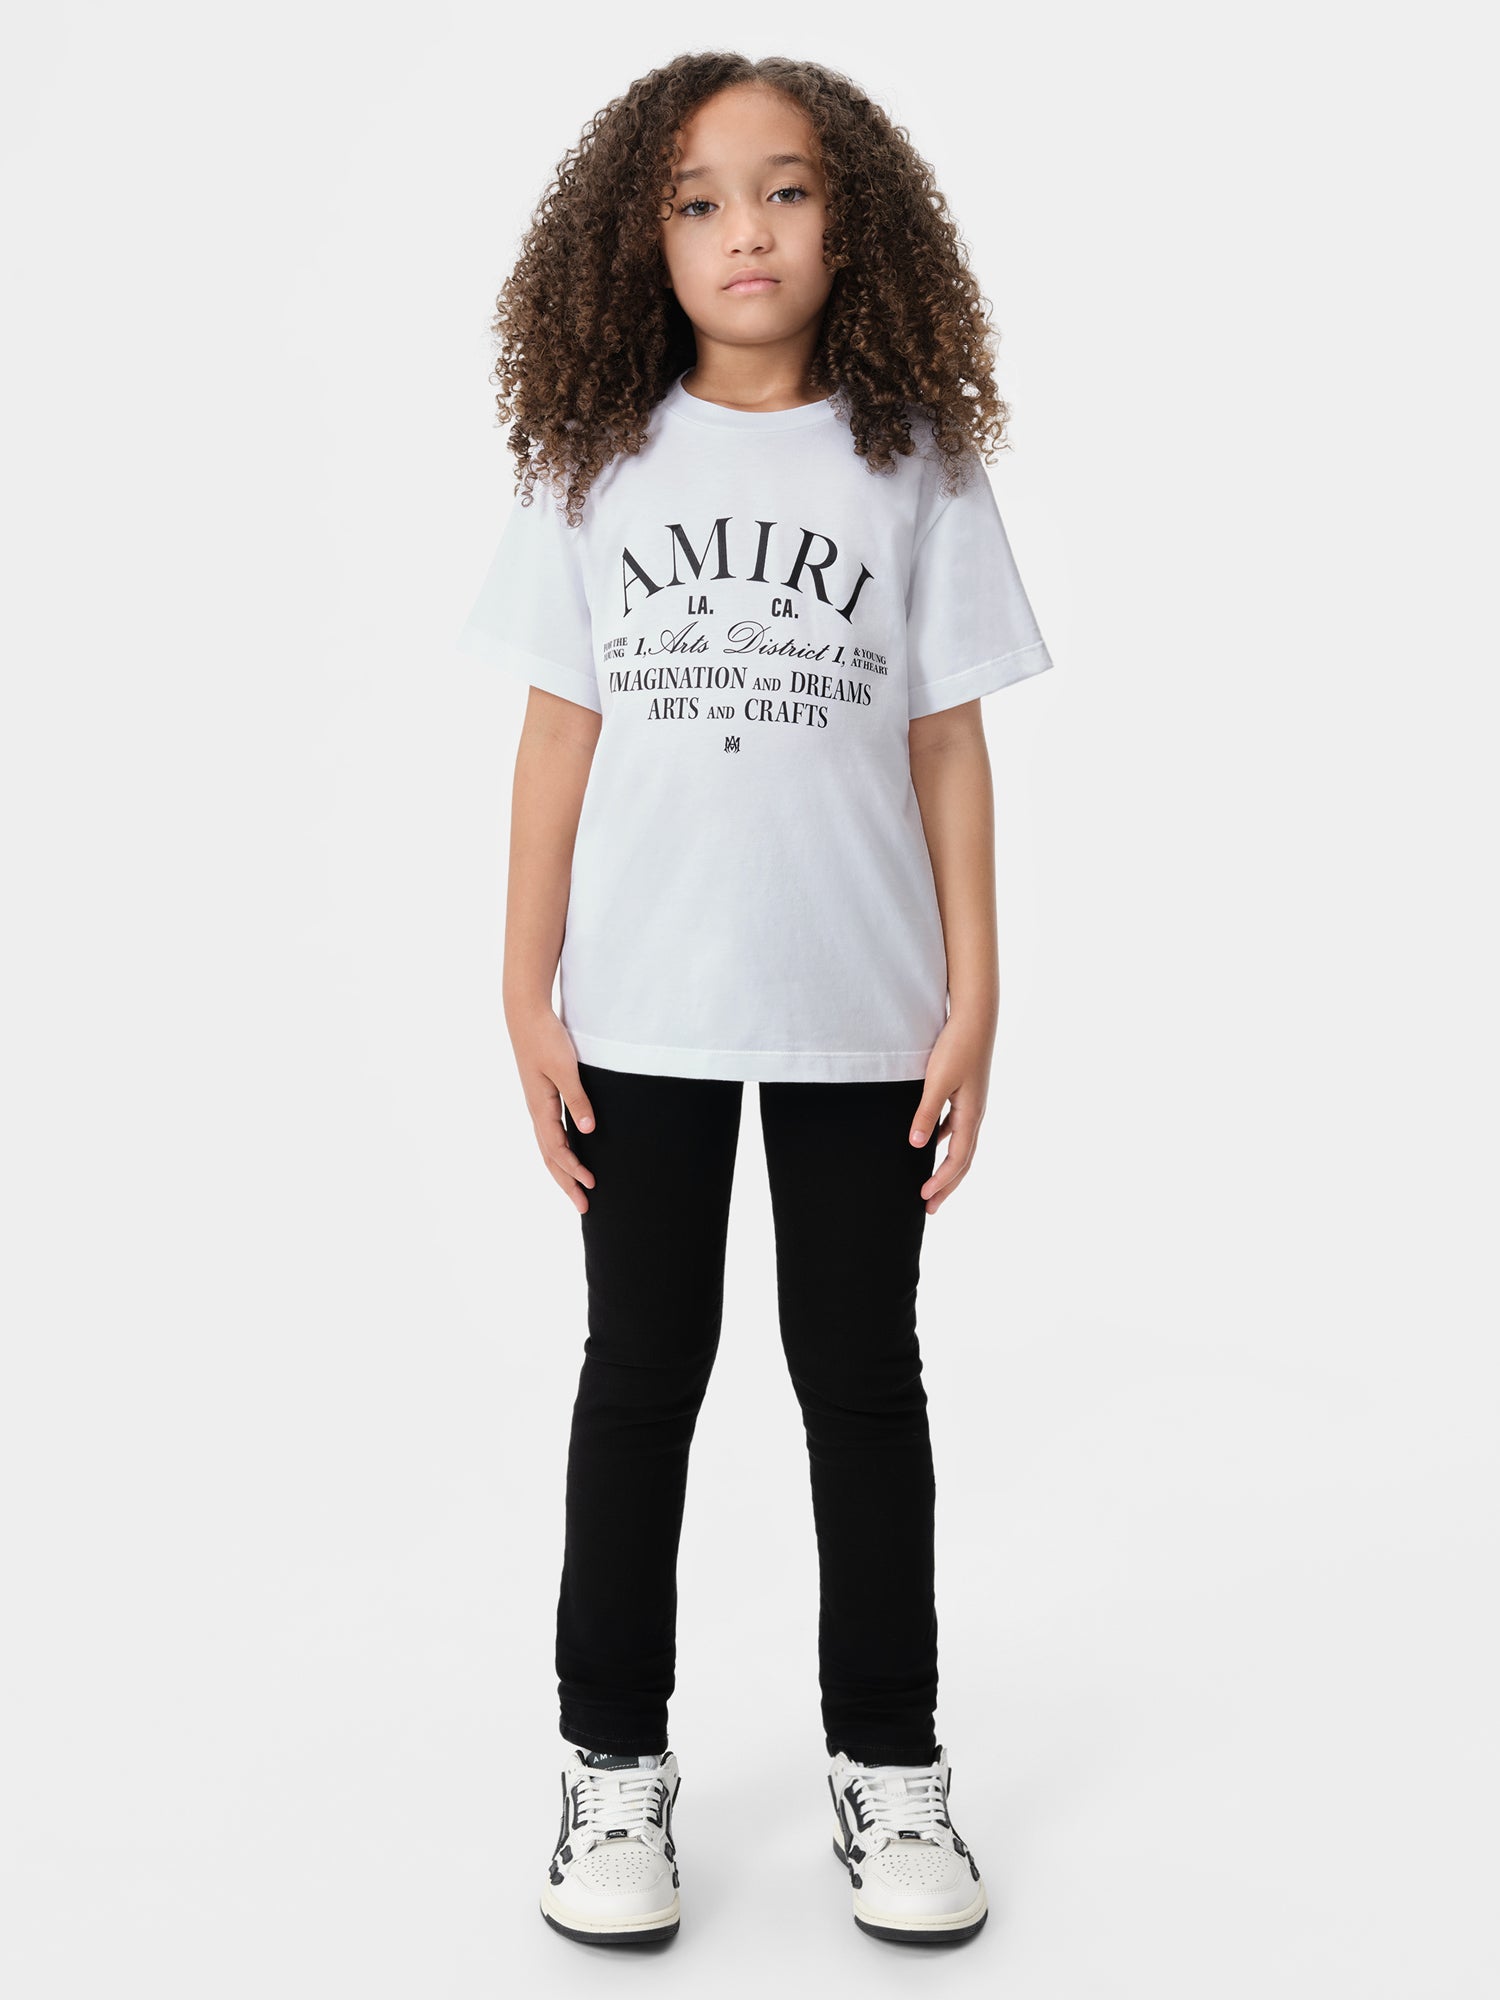 Product KIDS - KIDS' AMIRI ARTS DISTRICT TEE - White featured image